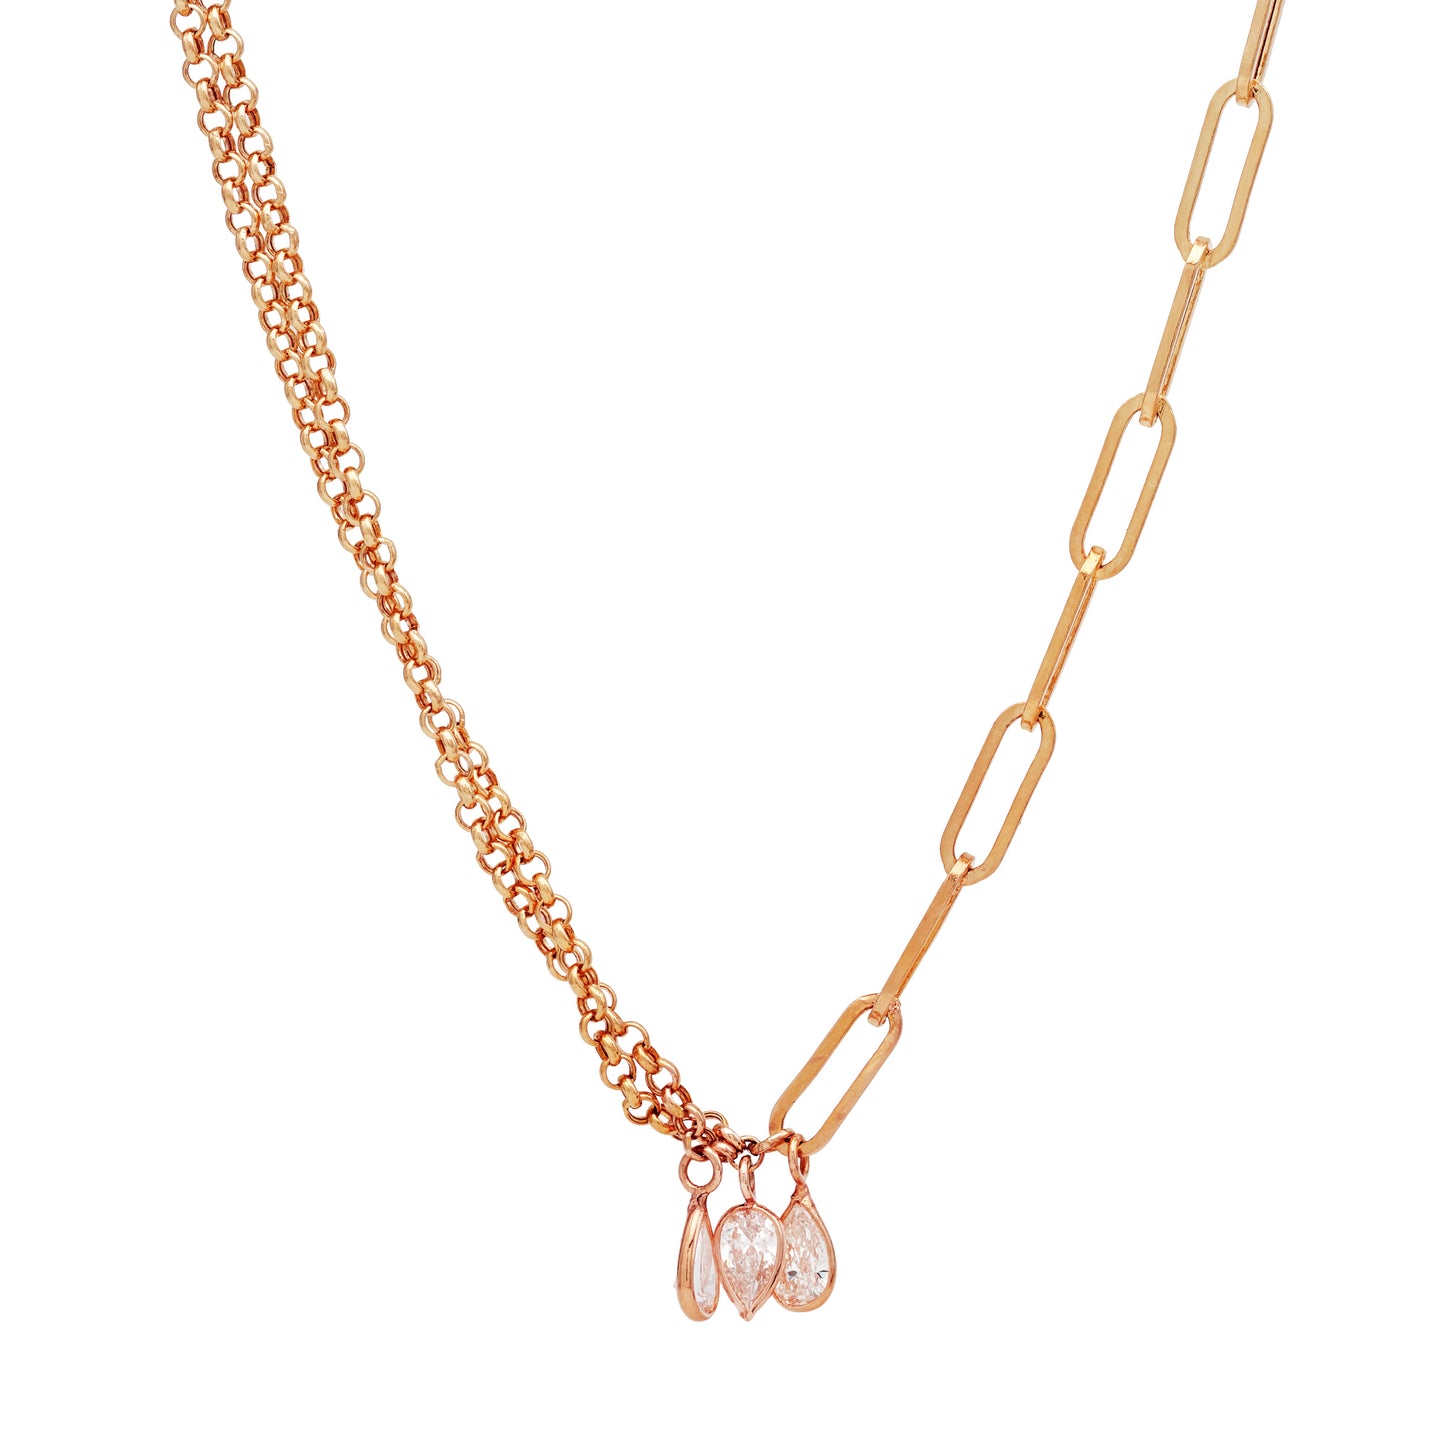 Diamond Drop Mixed Chain Necklace